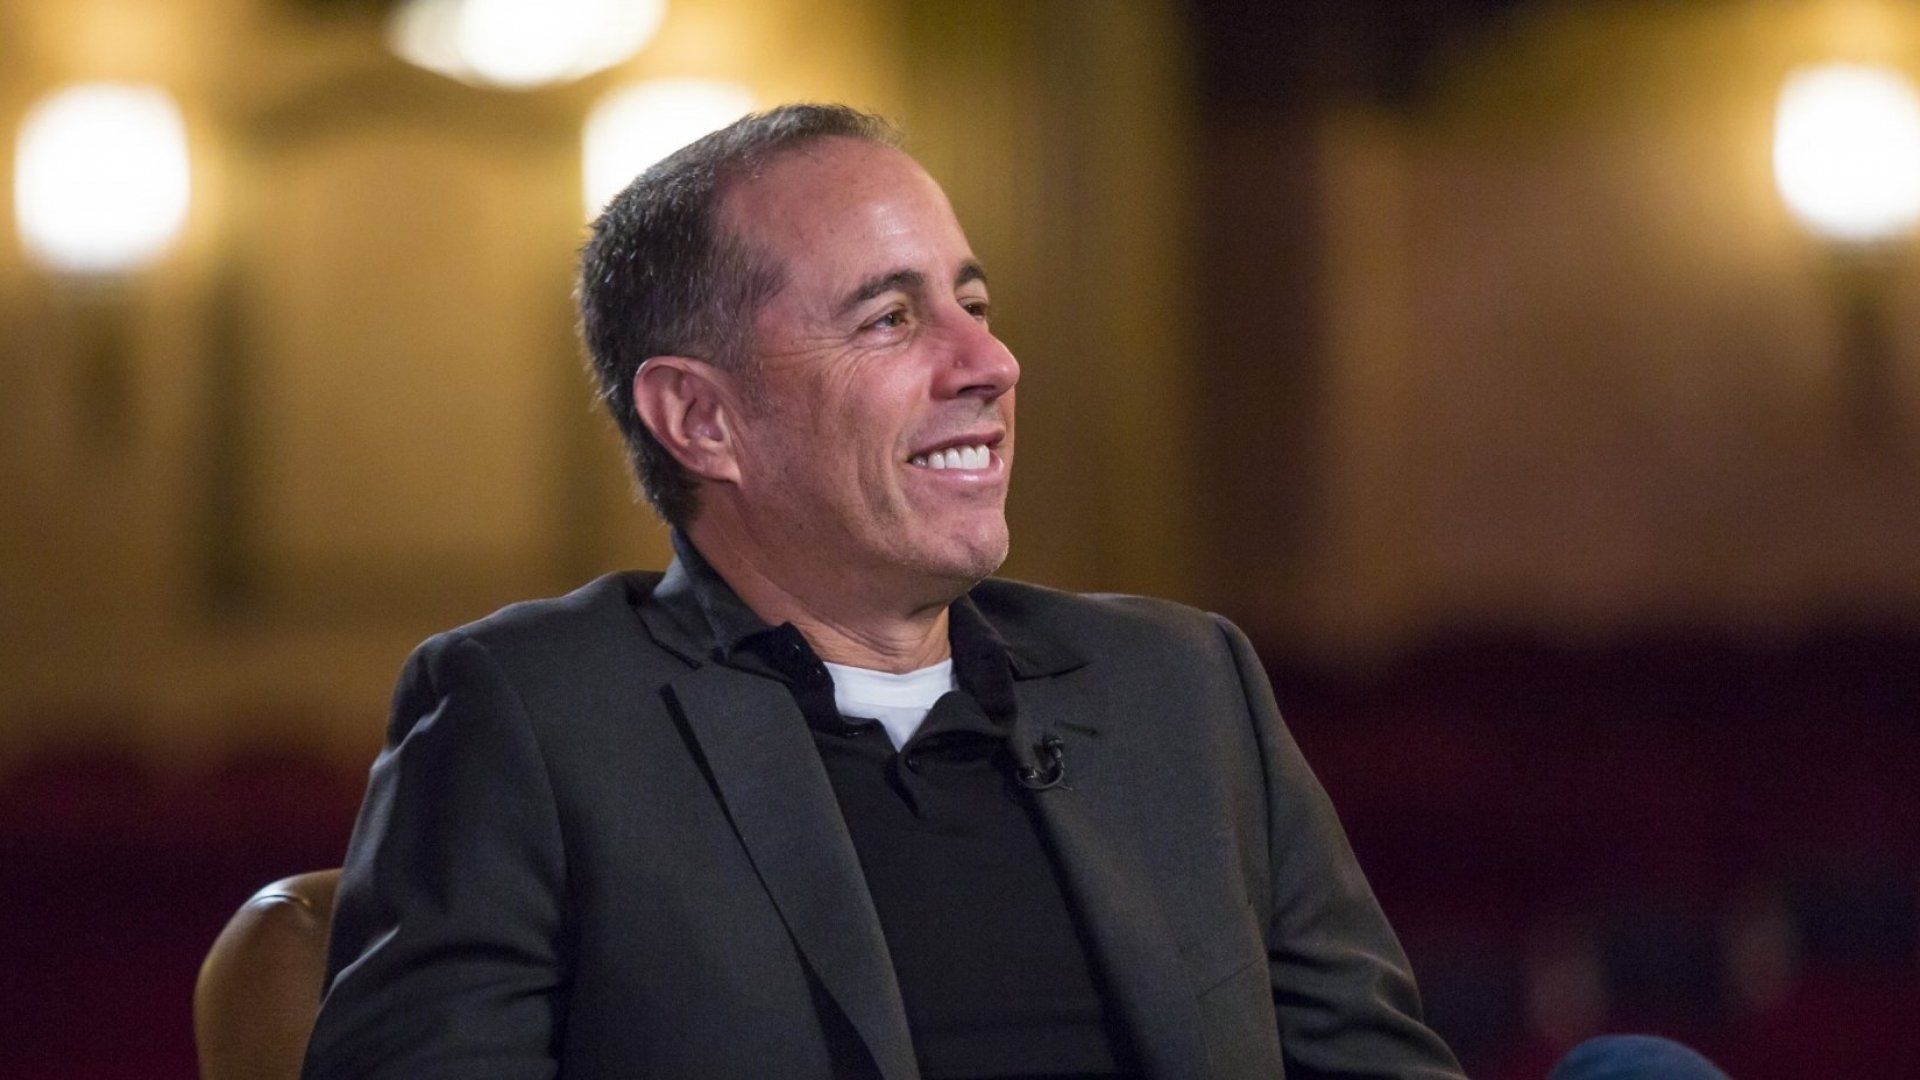 It Only Took Jerry Seinfeld a Few Words to Drop the Best Career Advice You'll Hear Today